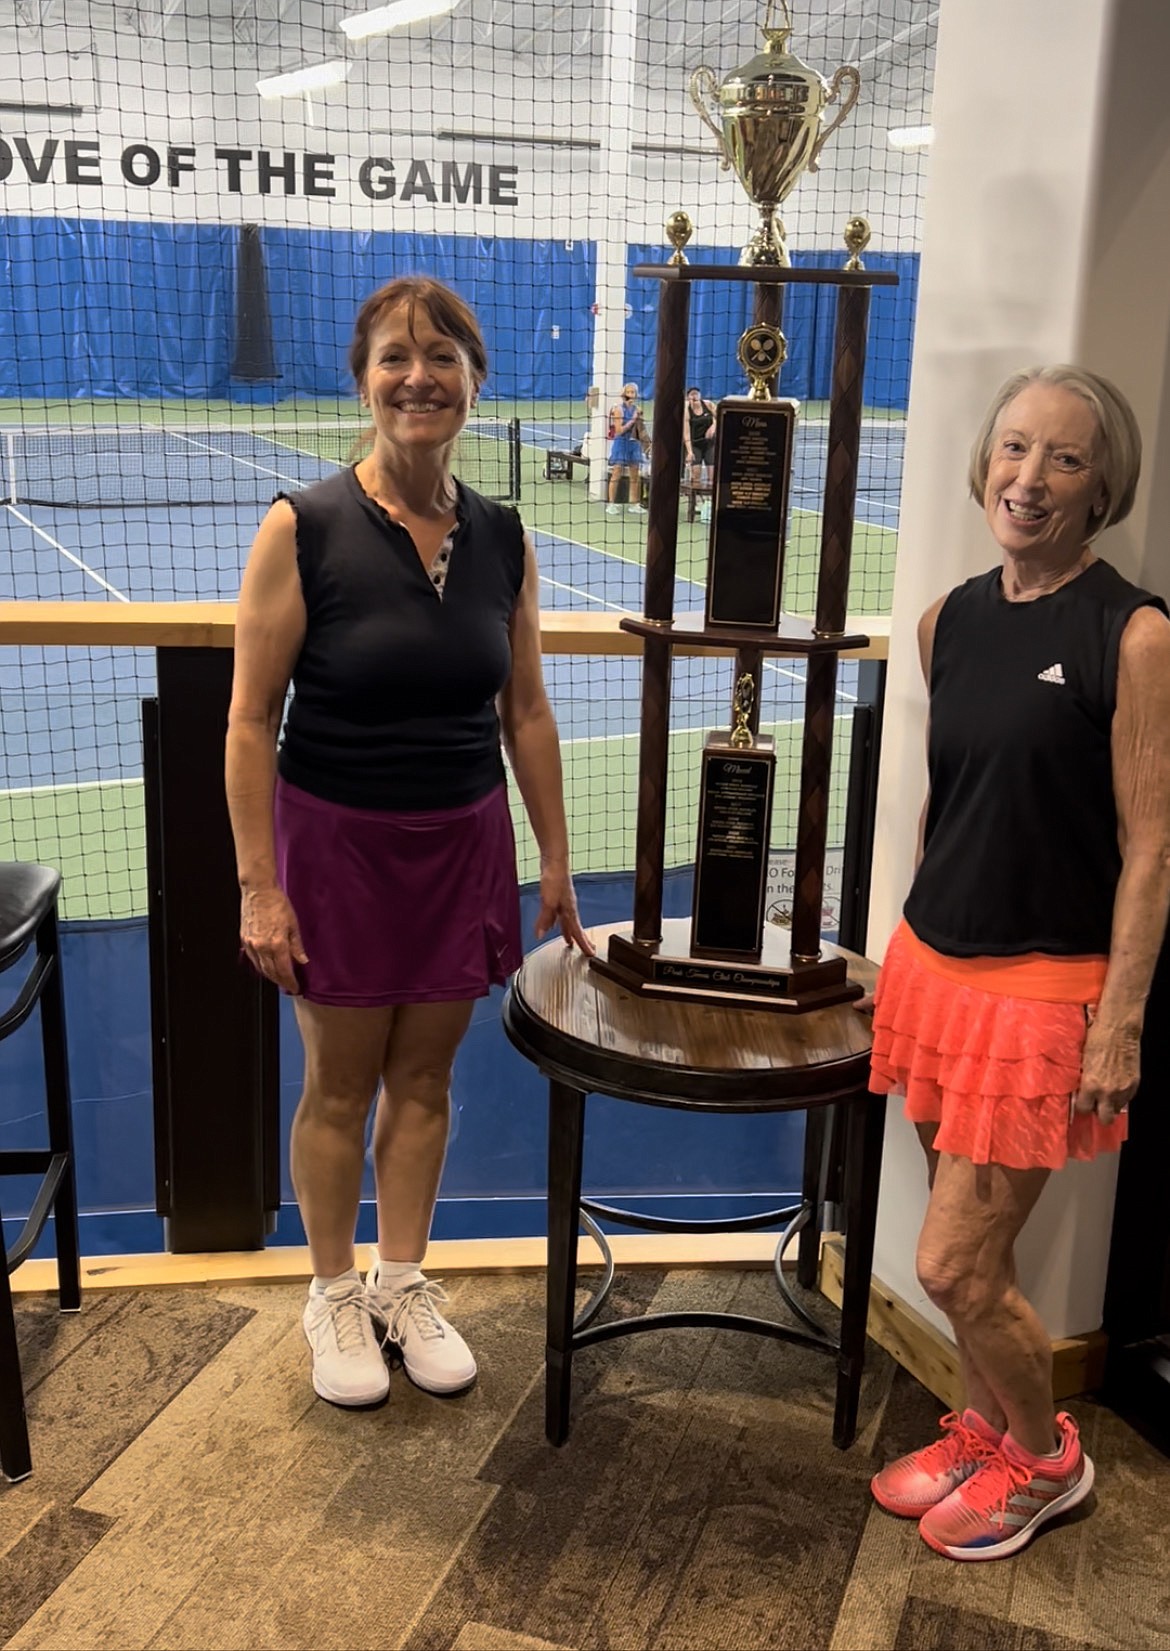 Courtesy photo
The women's 3.0 doubles champions at the recent Peak Hayden member tennis tournament were, from left, Catherine Hann and Gloria Hendrickson, who defeated Patty Petersen and Liz Barrett 4-6, 6-1, 10-6.